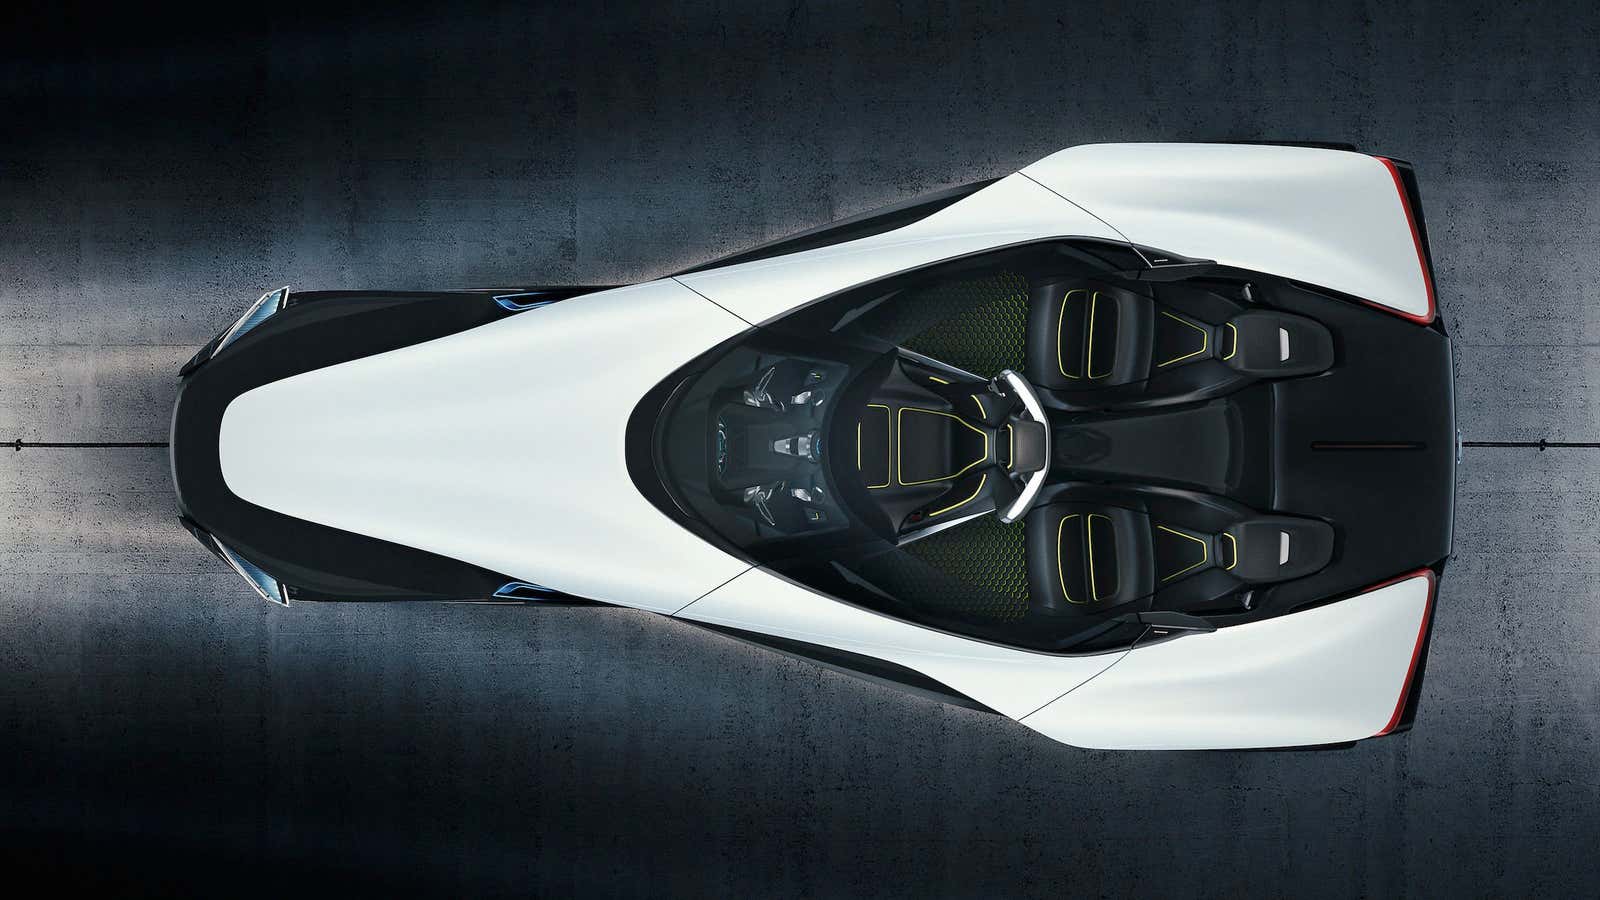 The &quot;swept wing&quot; design of the Nissan Bladeglider EV.